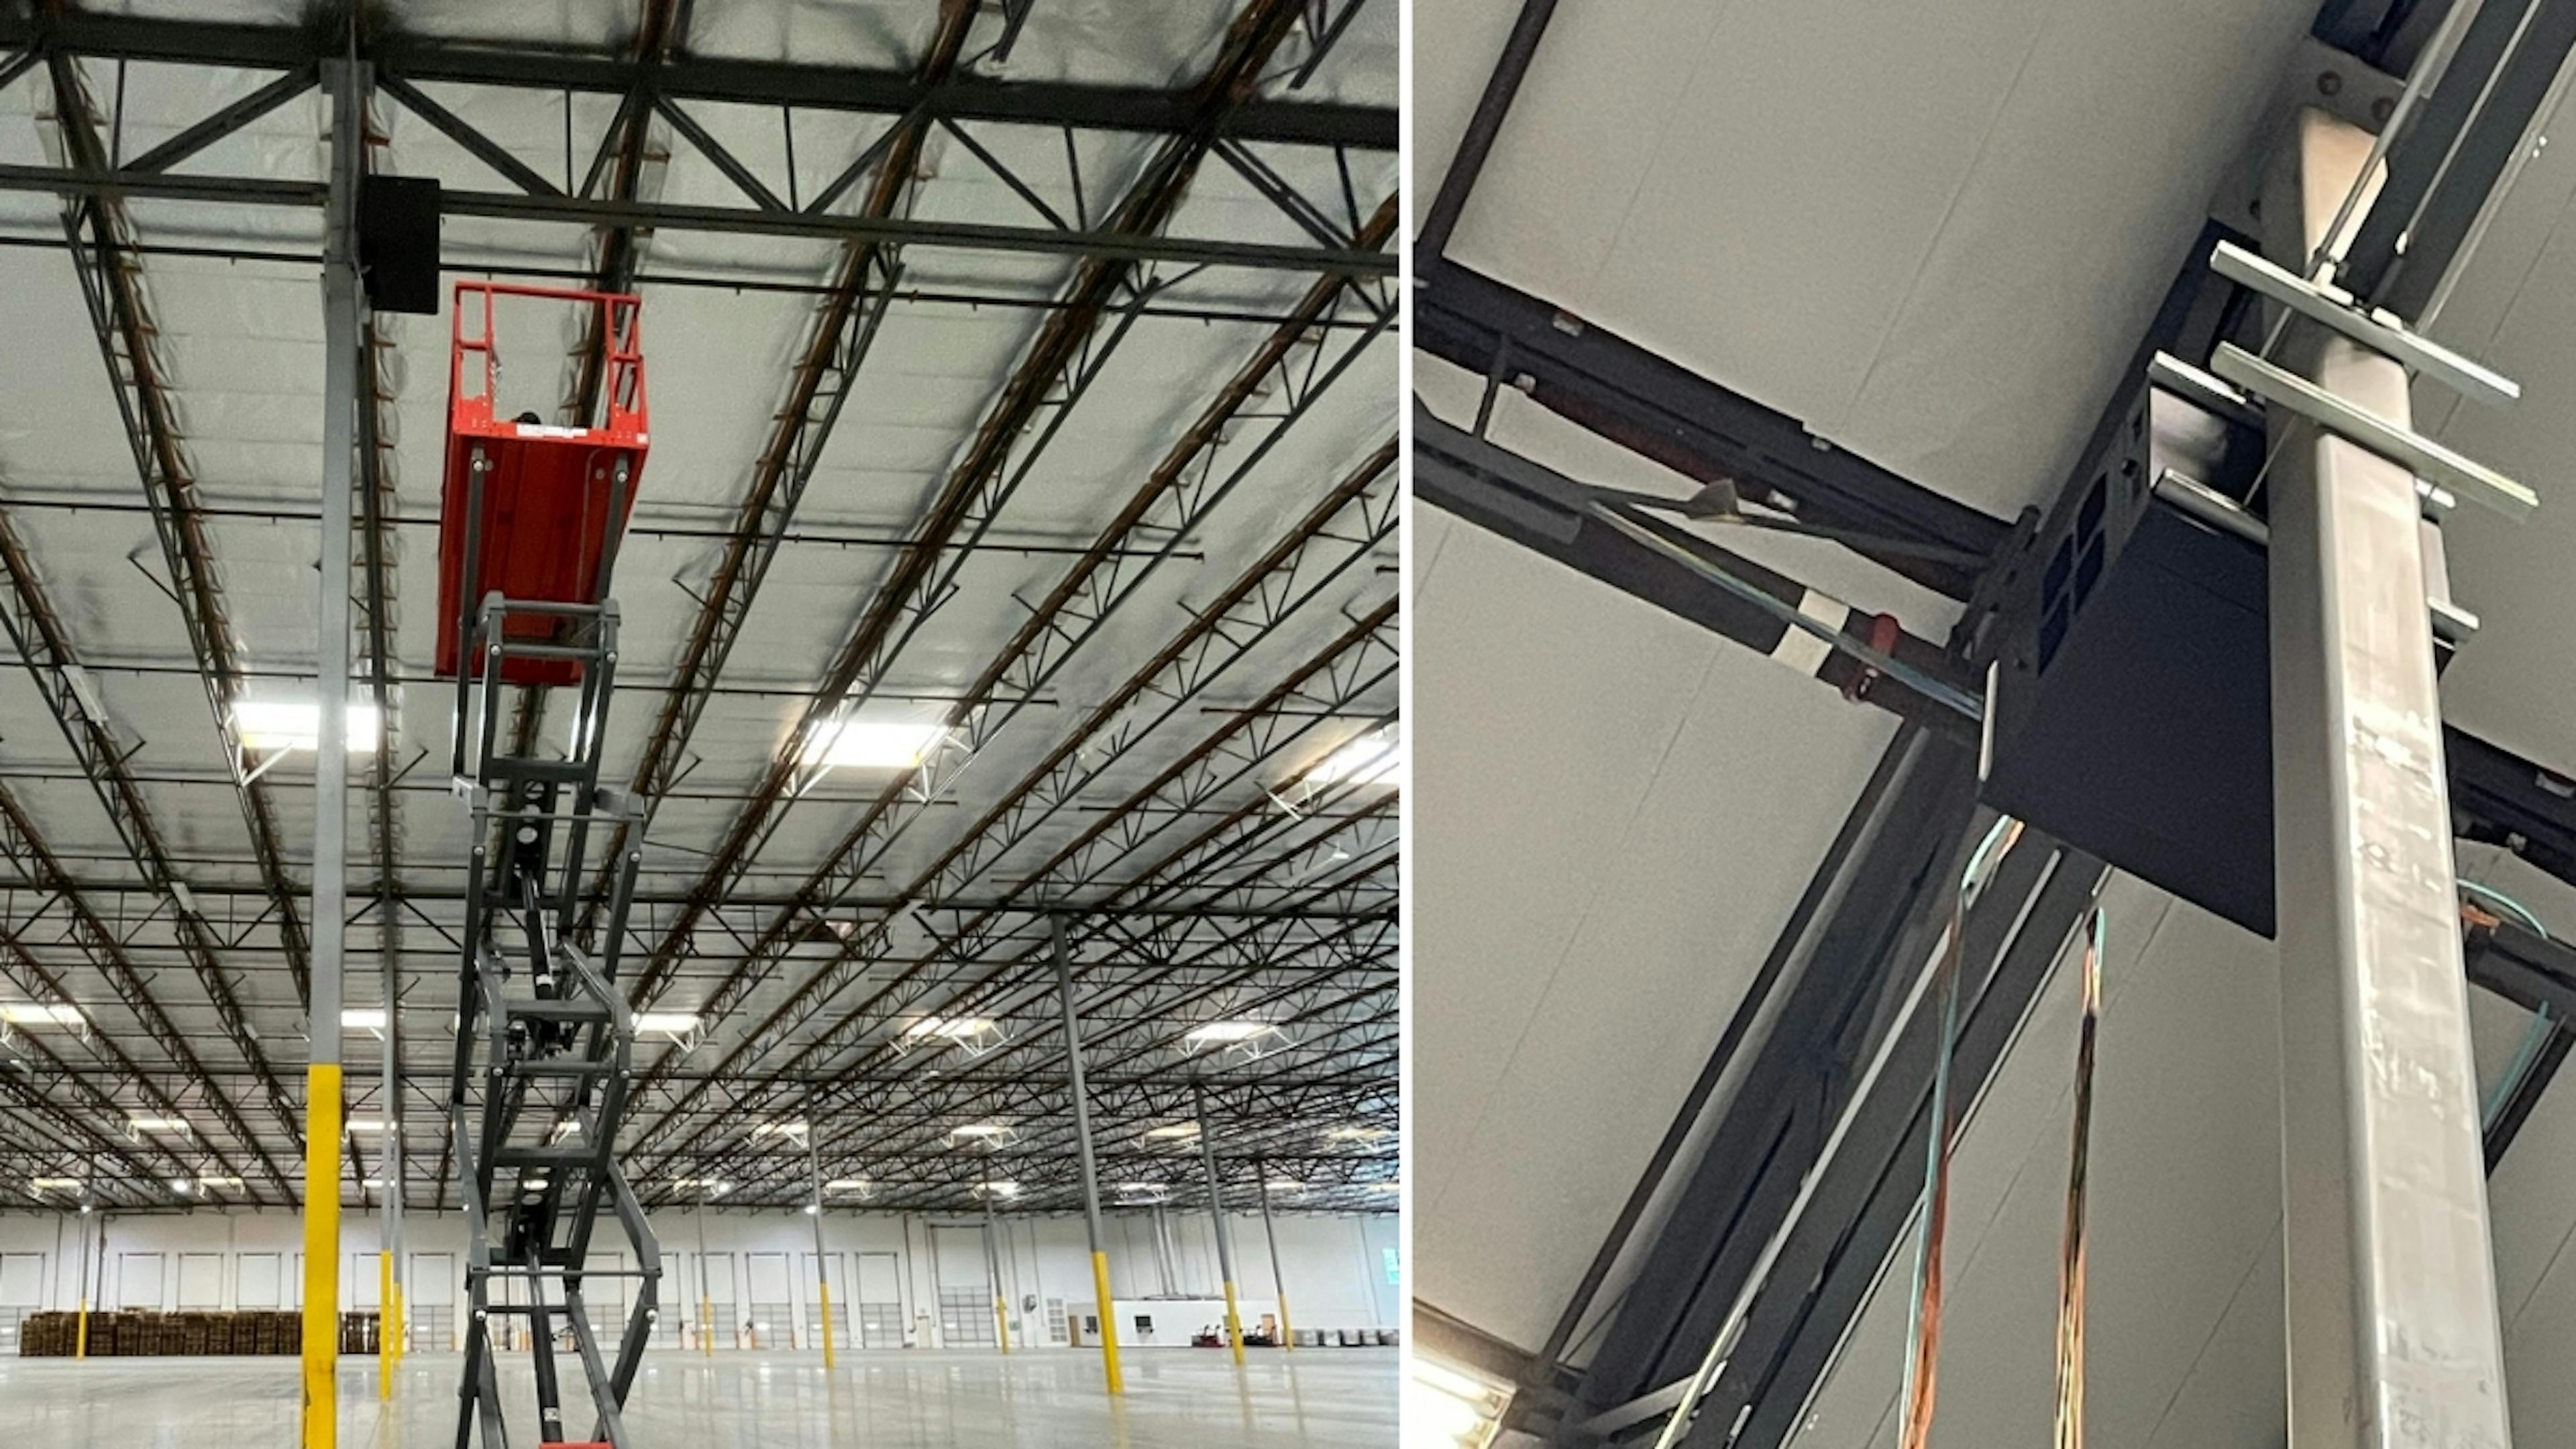 Two examples of warehouse data cabling are installed and hung securely.